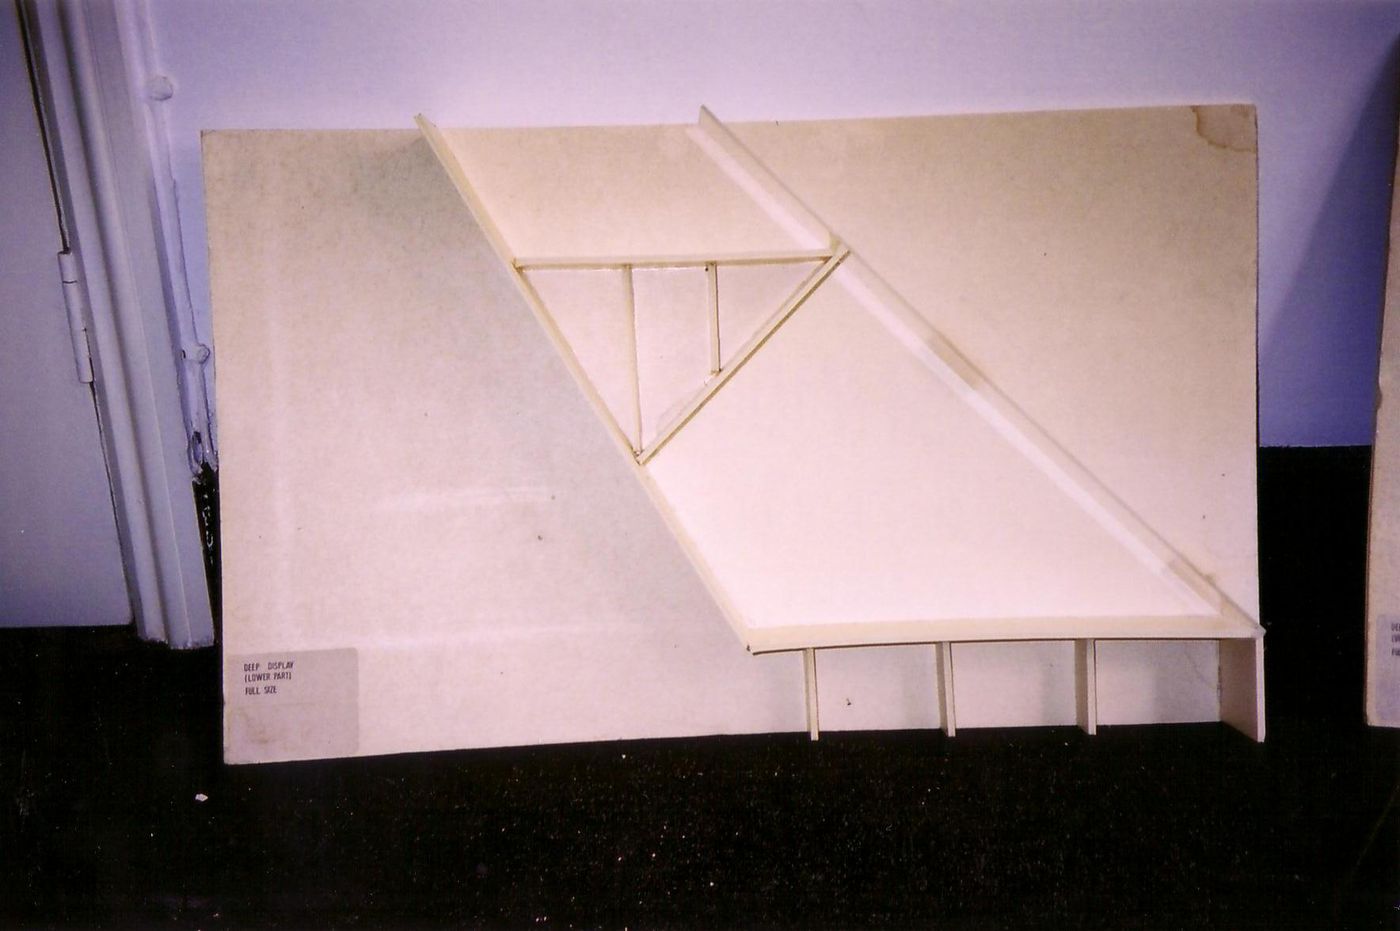 Full-scale cross section model of lower part of deep area of display case